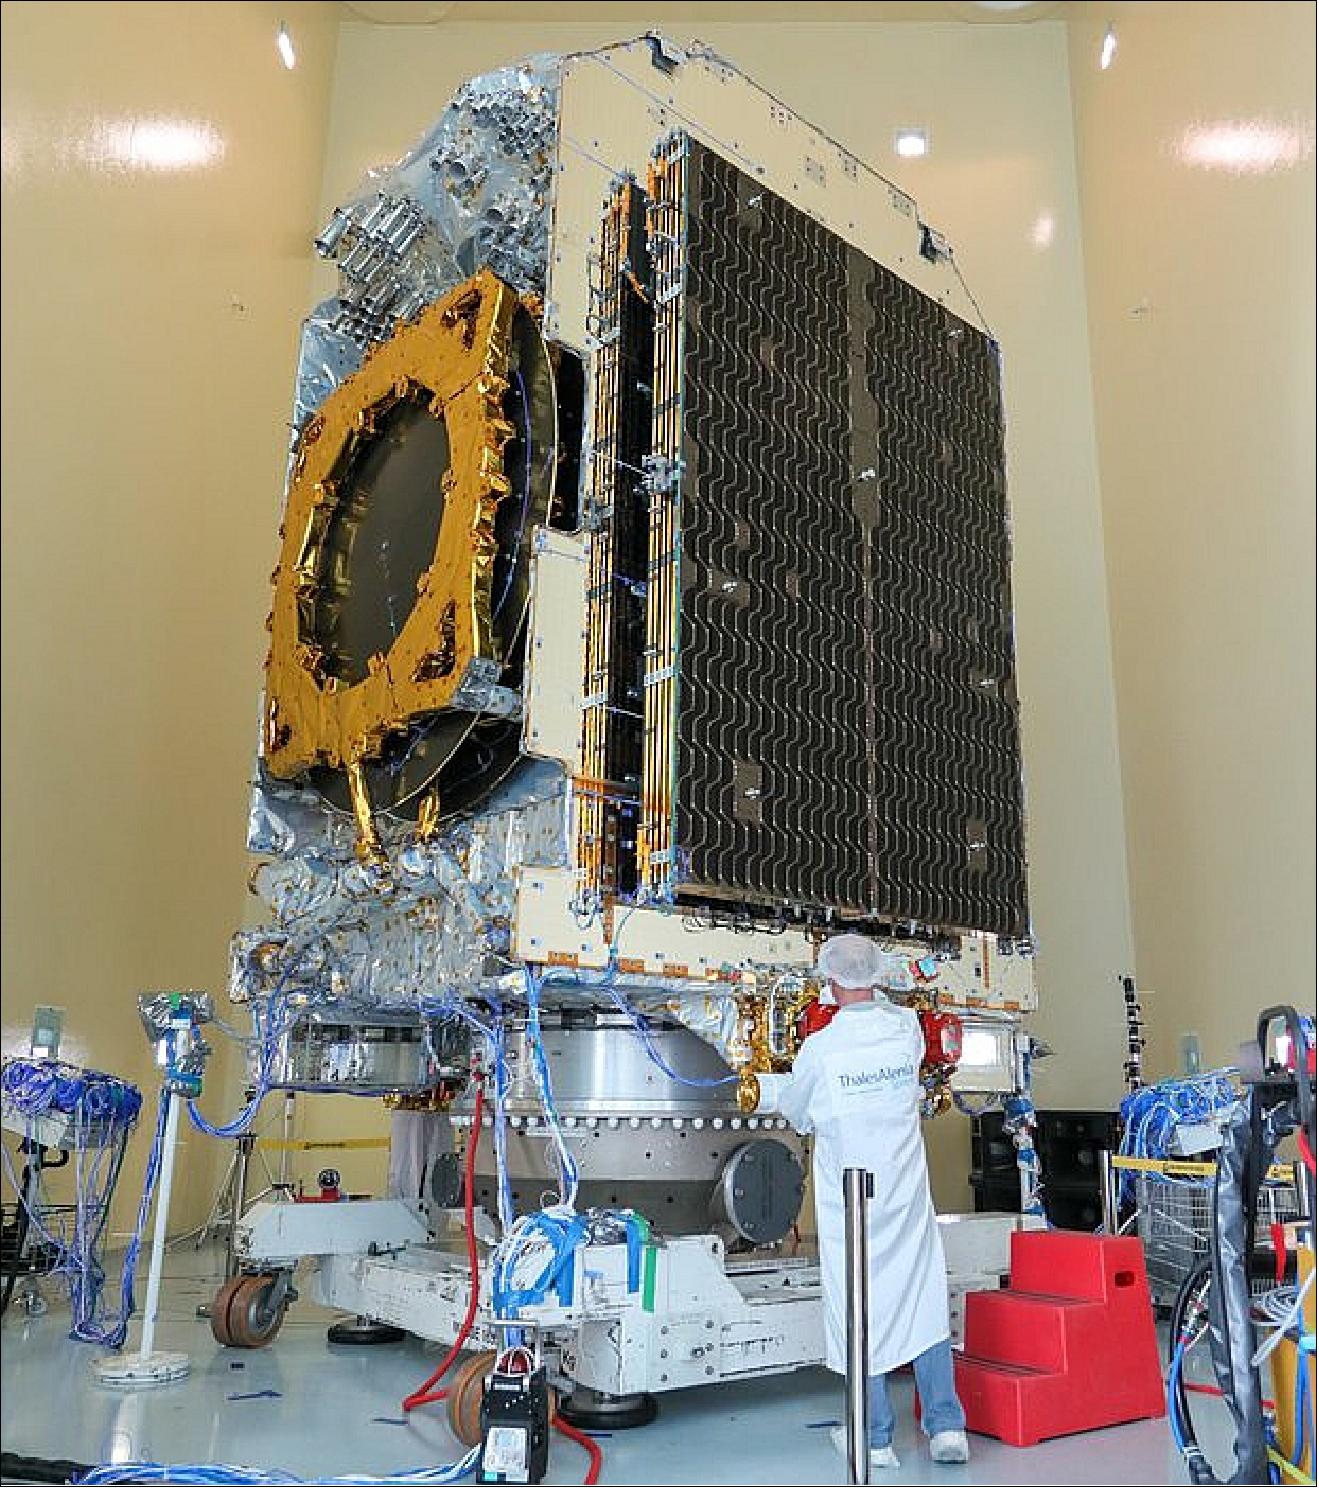 Figure 1: Photo of the Konnect satellite in the acoustic chamber (image credit: Thales Alenia Space)